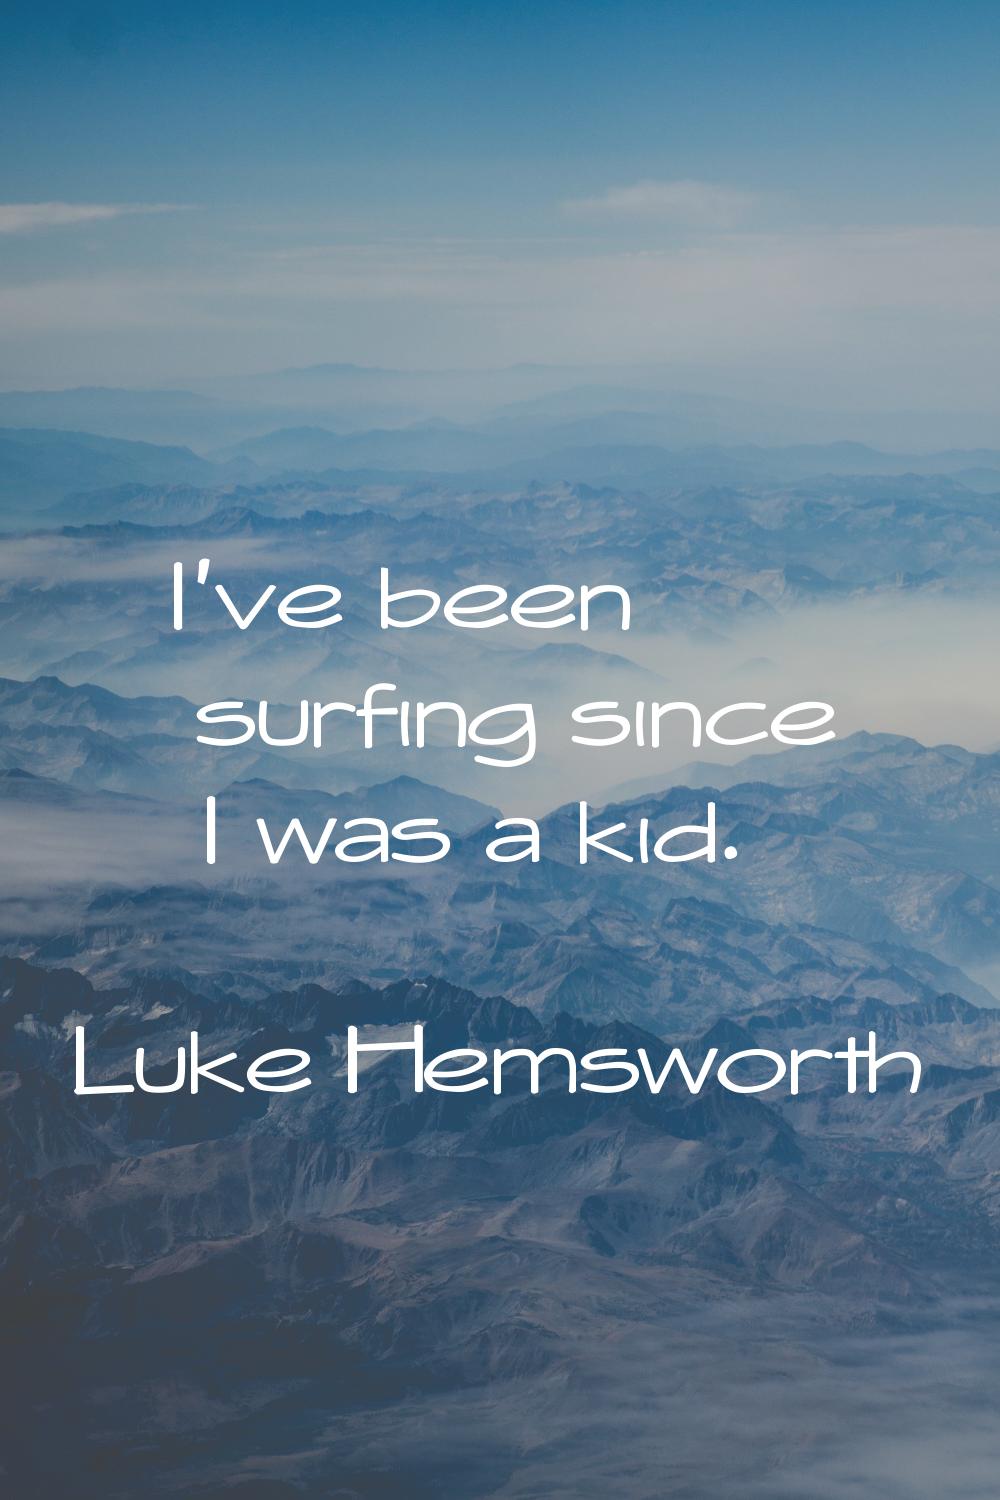 I've been surfing since I was a kid.